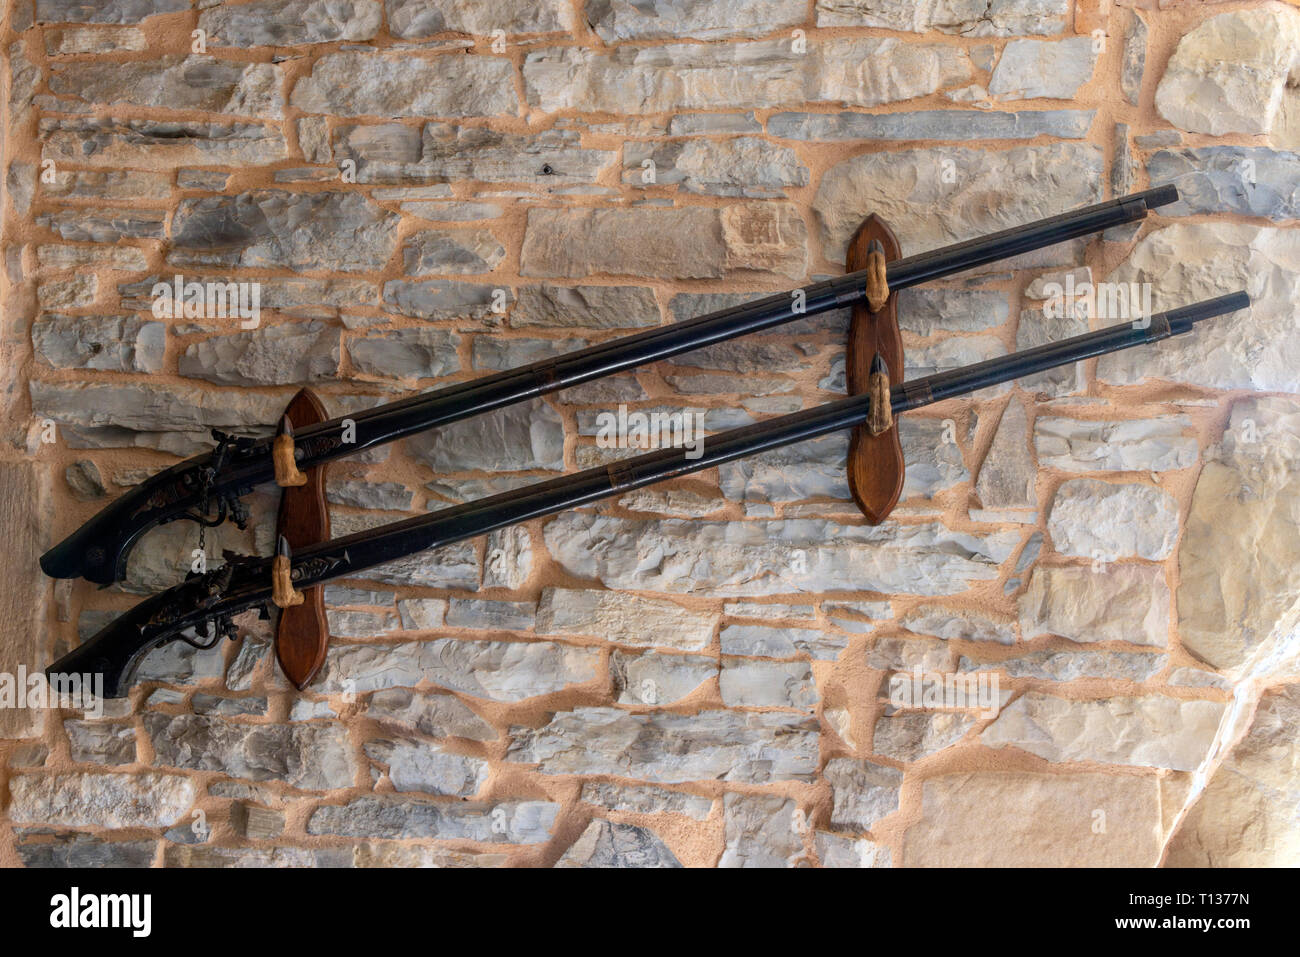 https www alamy com two long antique indonesian muskets mounted in a gun rack on a wall image241631369 html